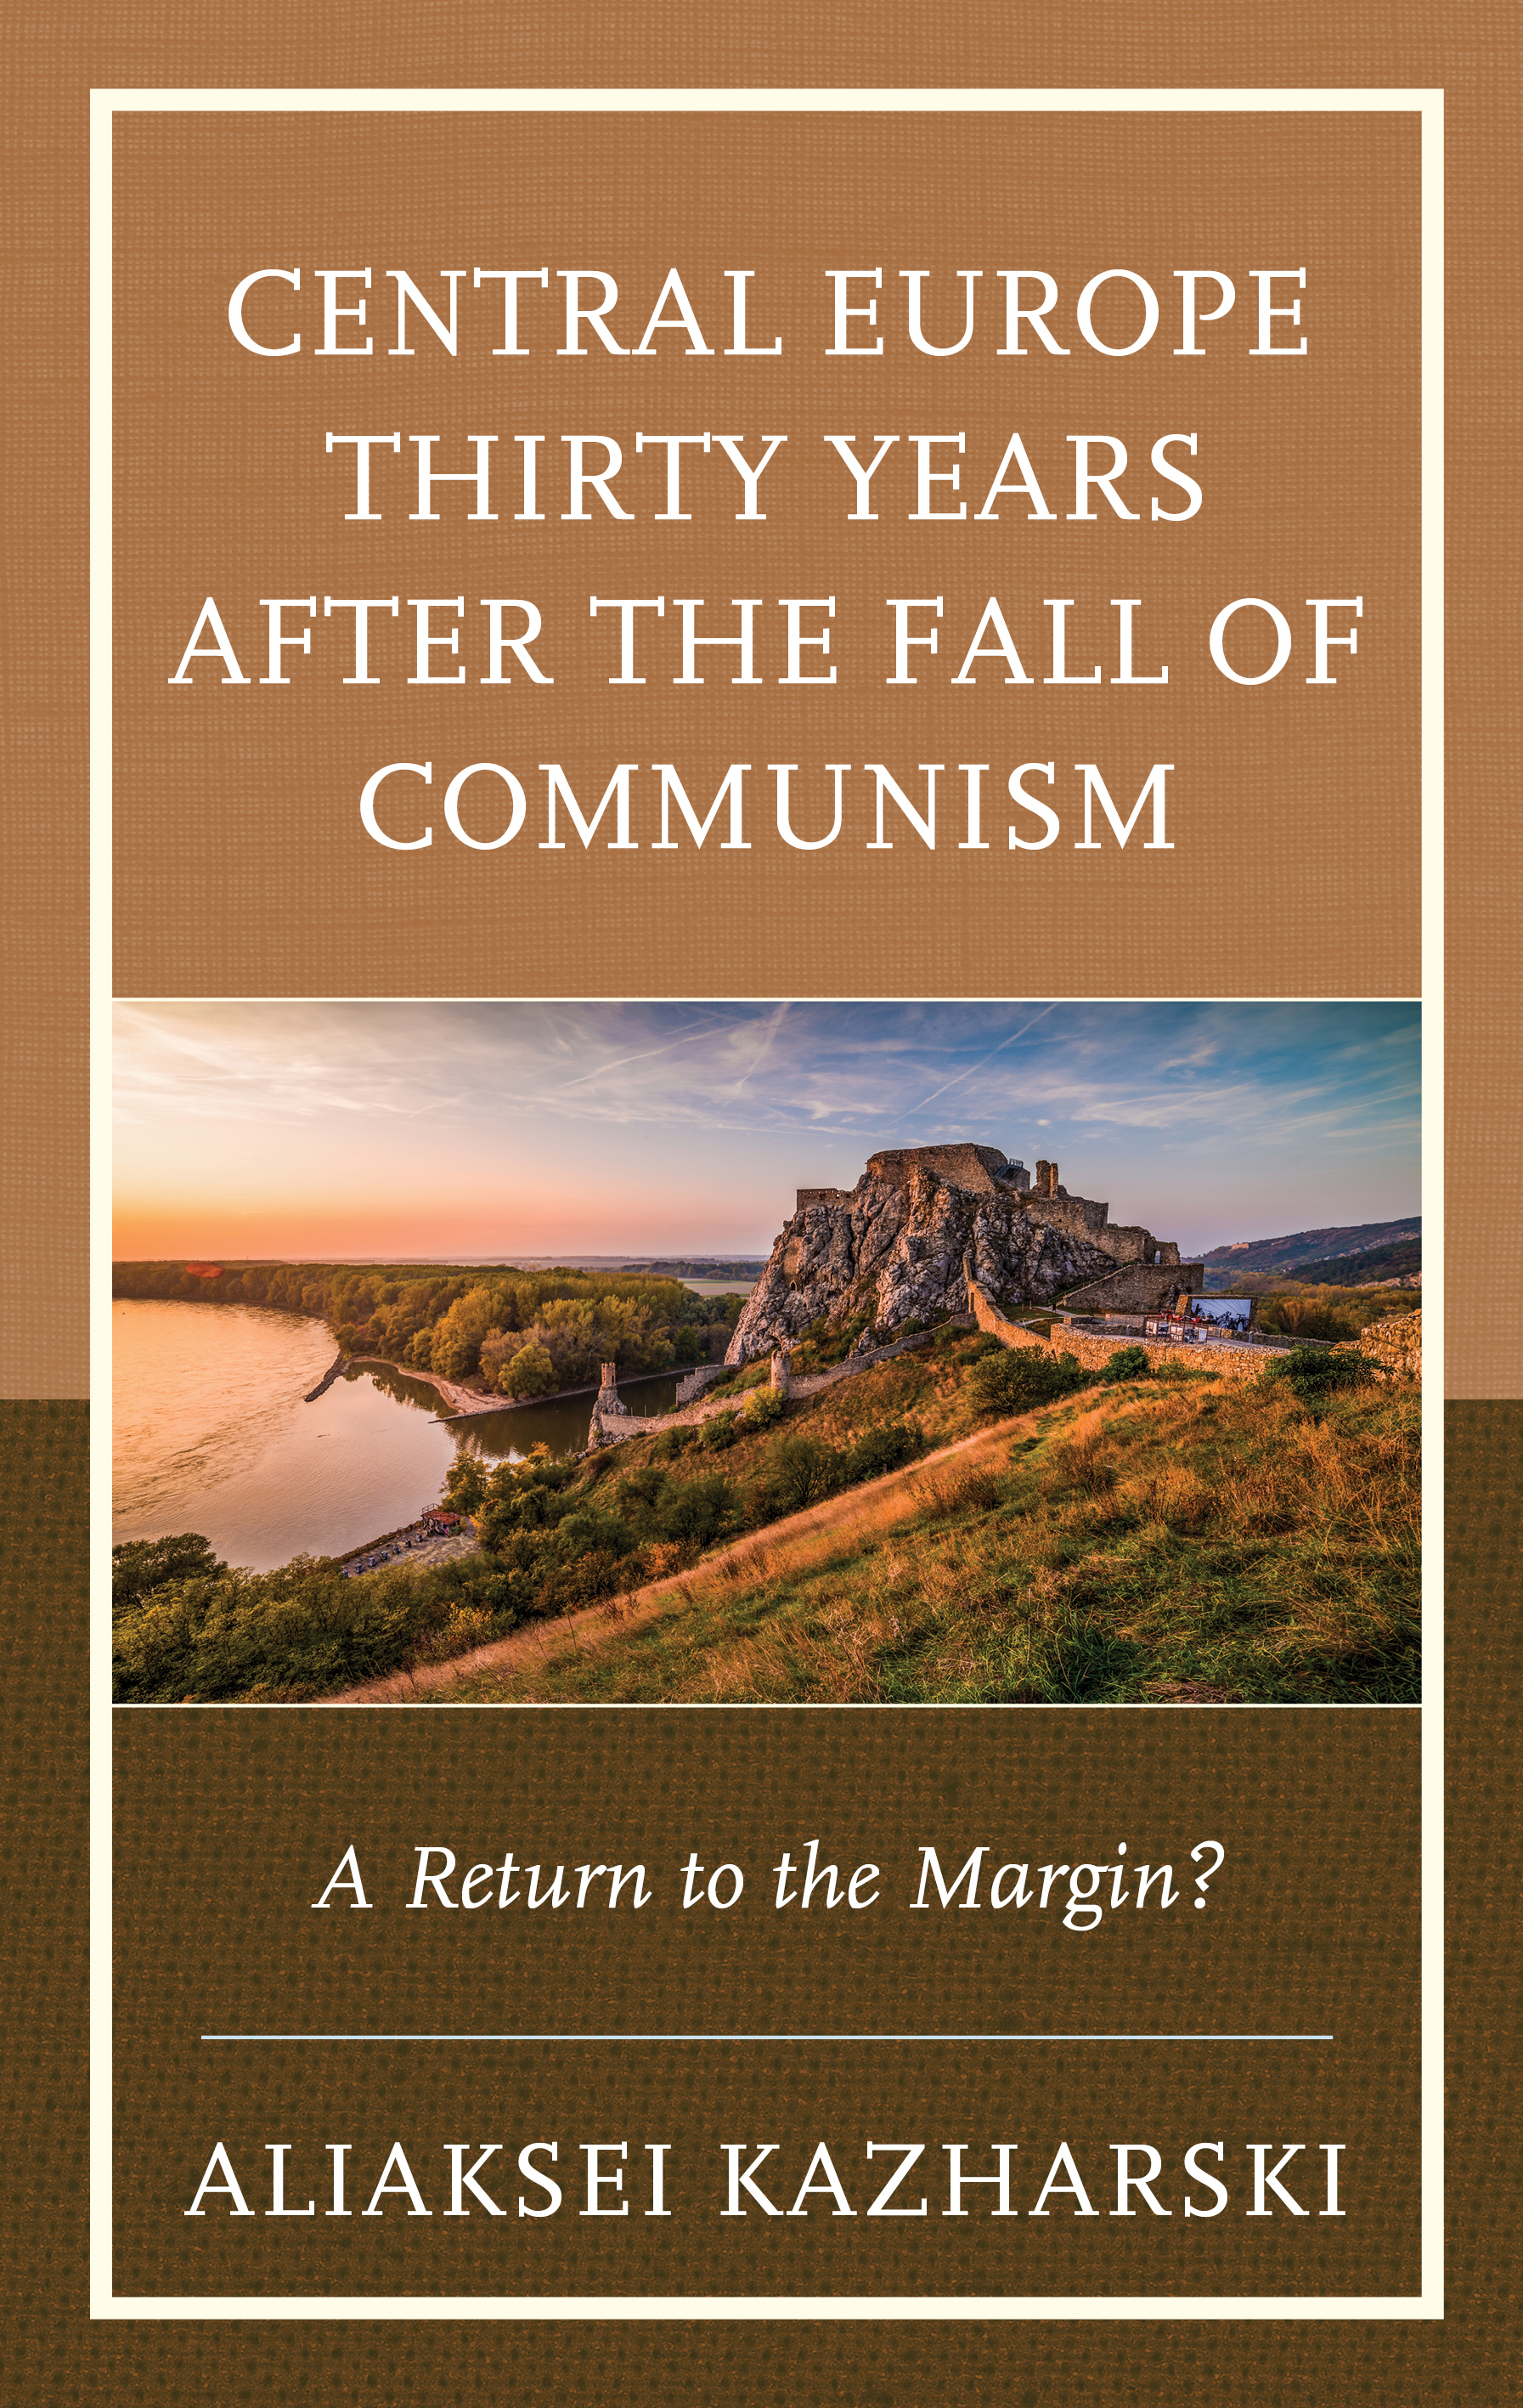 Central Europe Thirty Years after the Fall of Communism: A Return to the Margin?